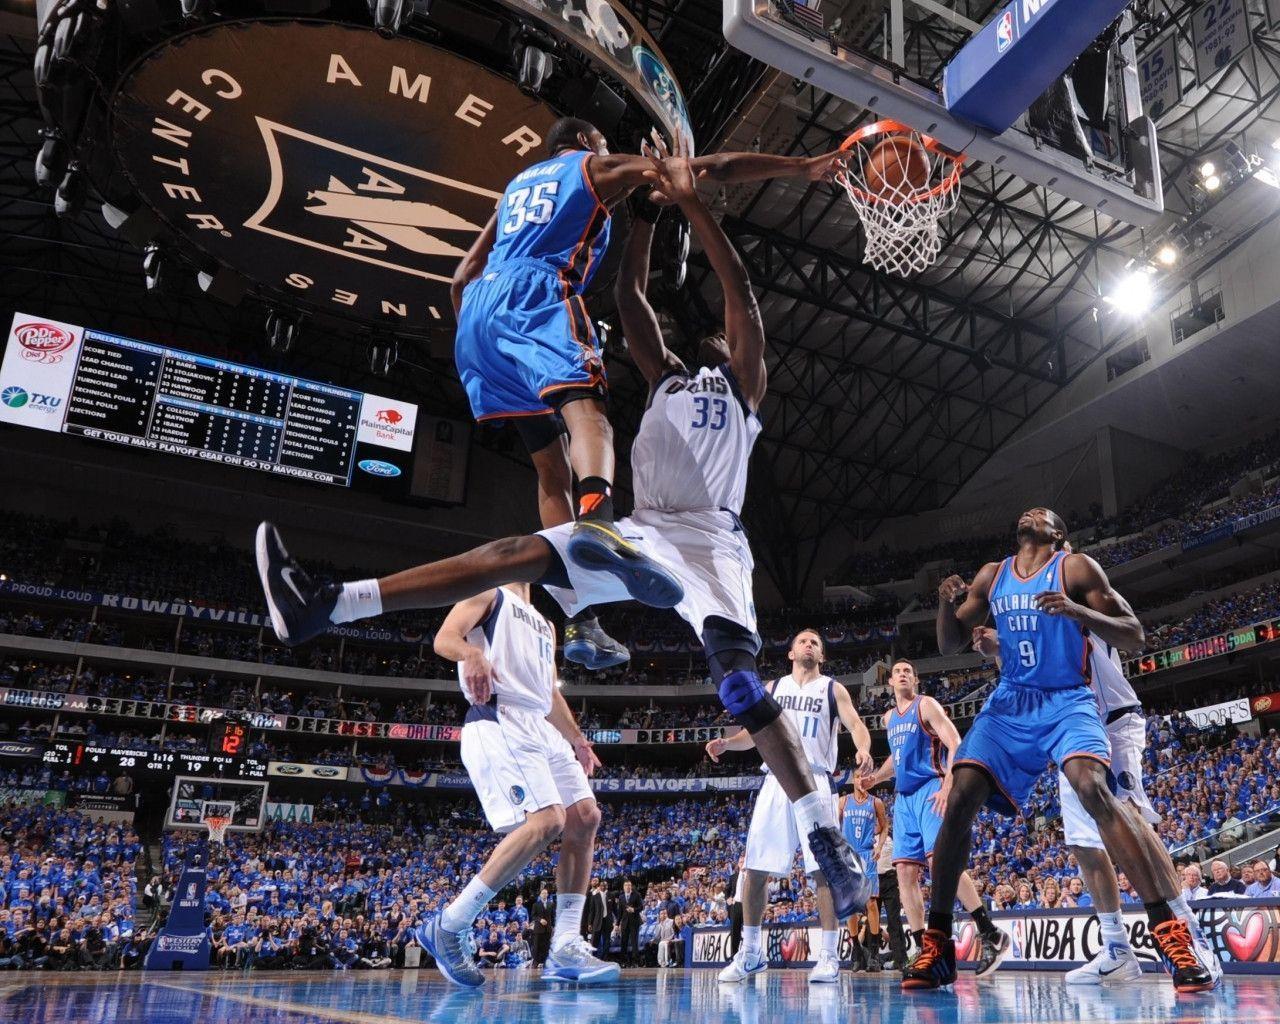 Download Kevin Durant Dunk Photo Widescreen 2 HD Wallpaper Full Size